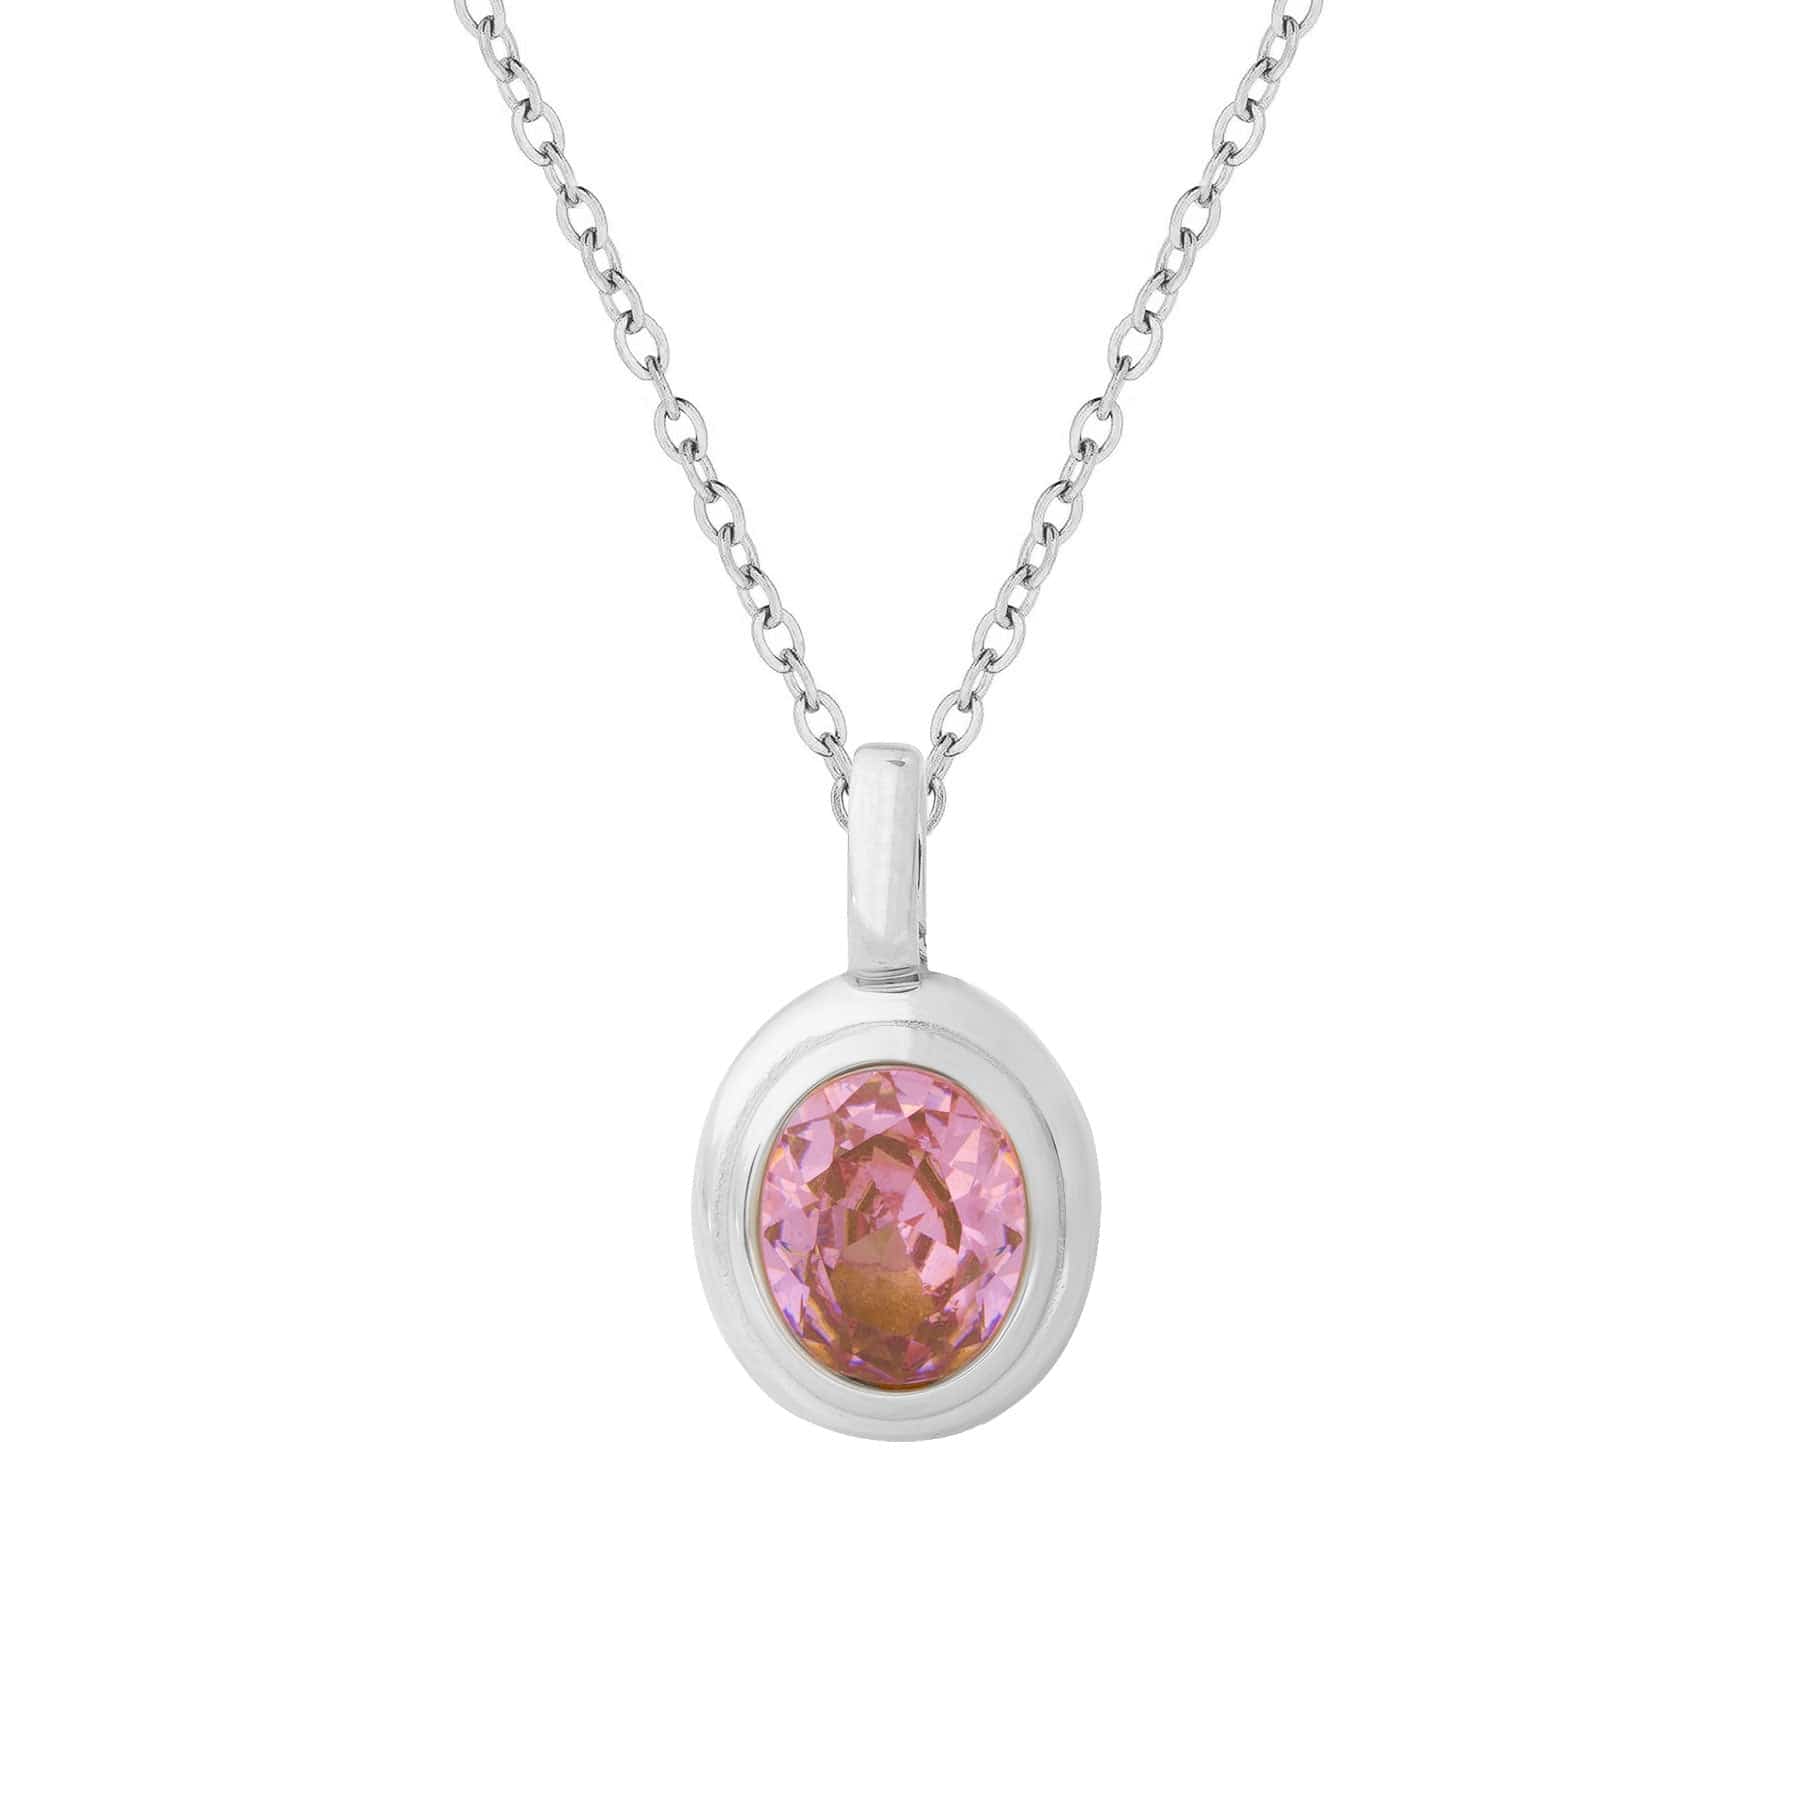 BohoMoon Stainless Steel Sawyer Necklace Silver / Pink